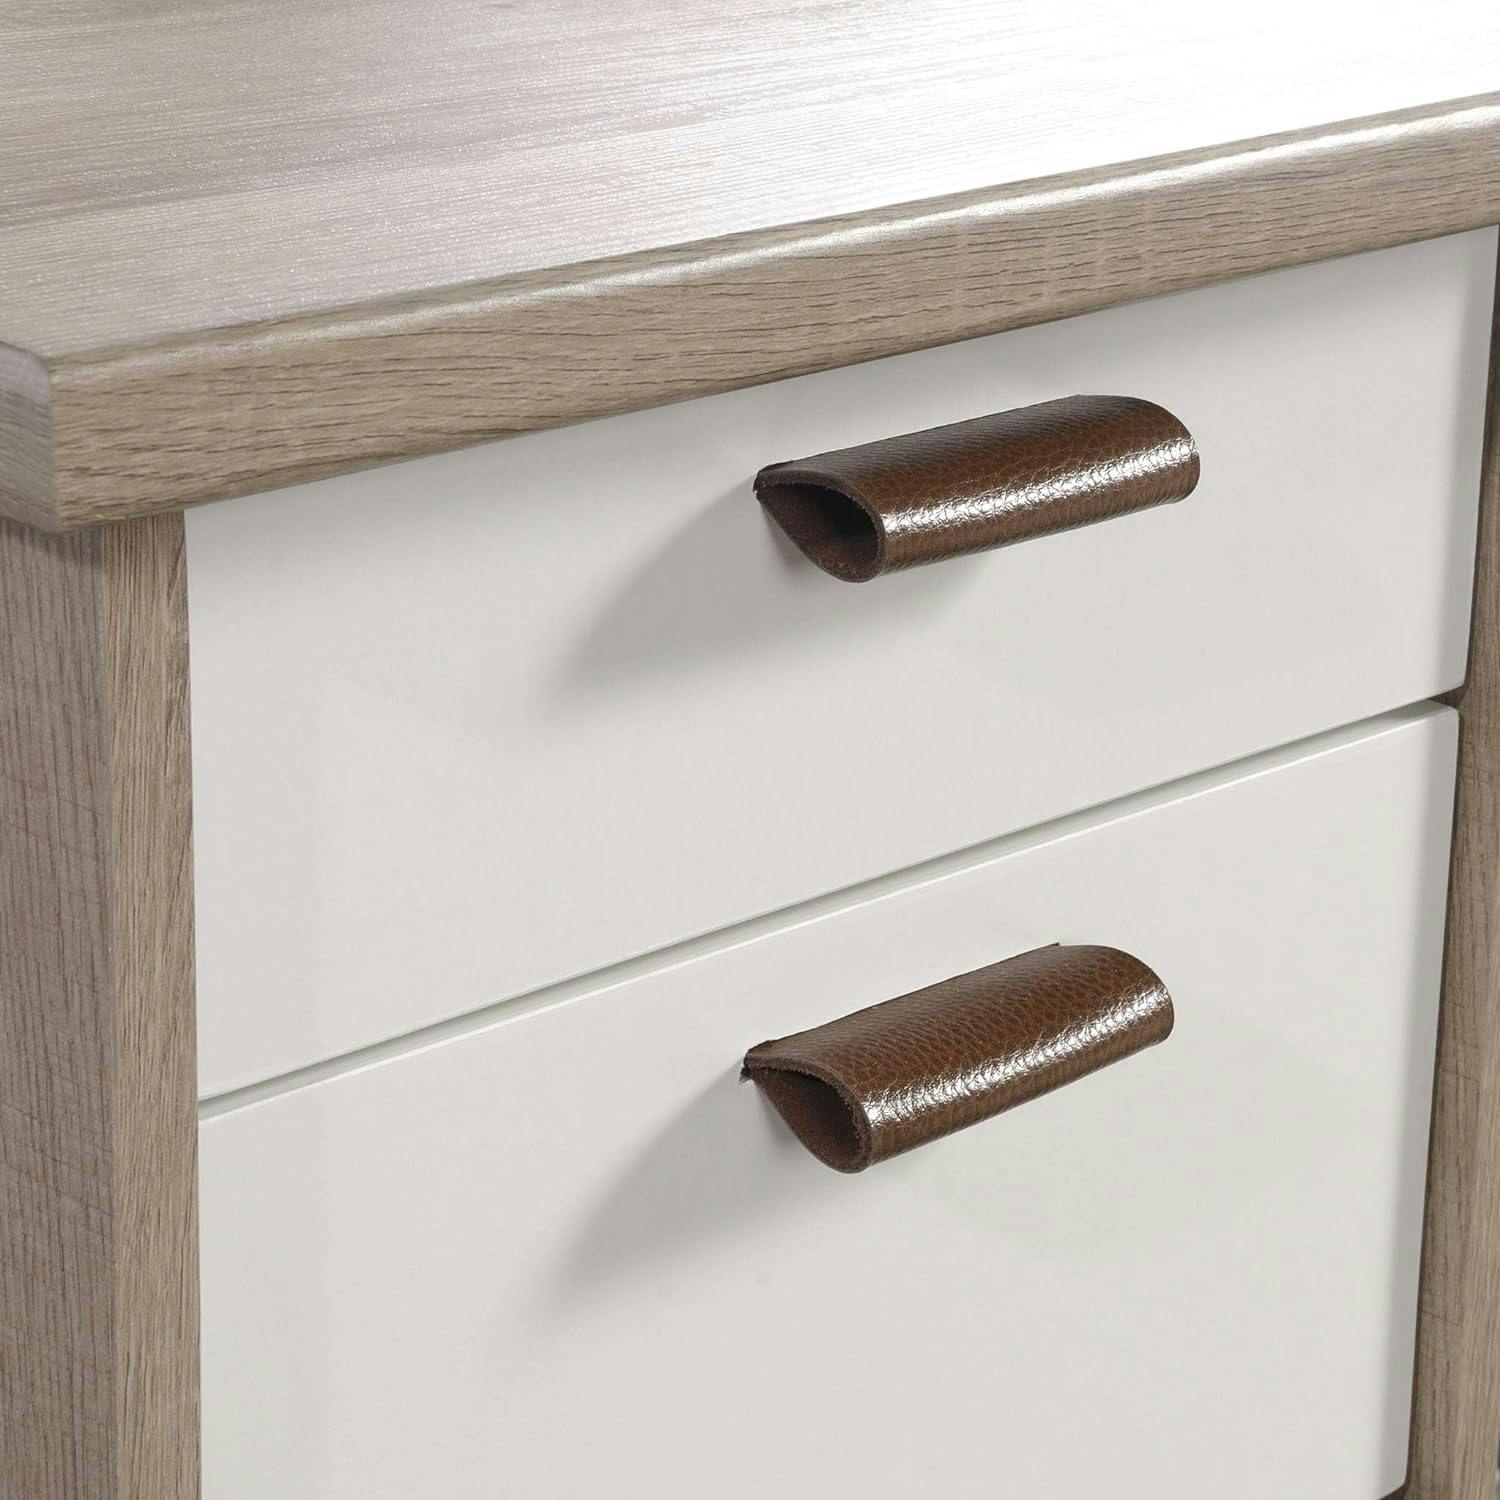 Sky Oak and White Executive Desk with Leather Drawer Pulls